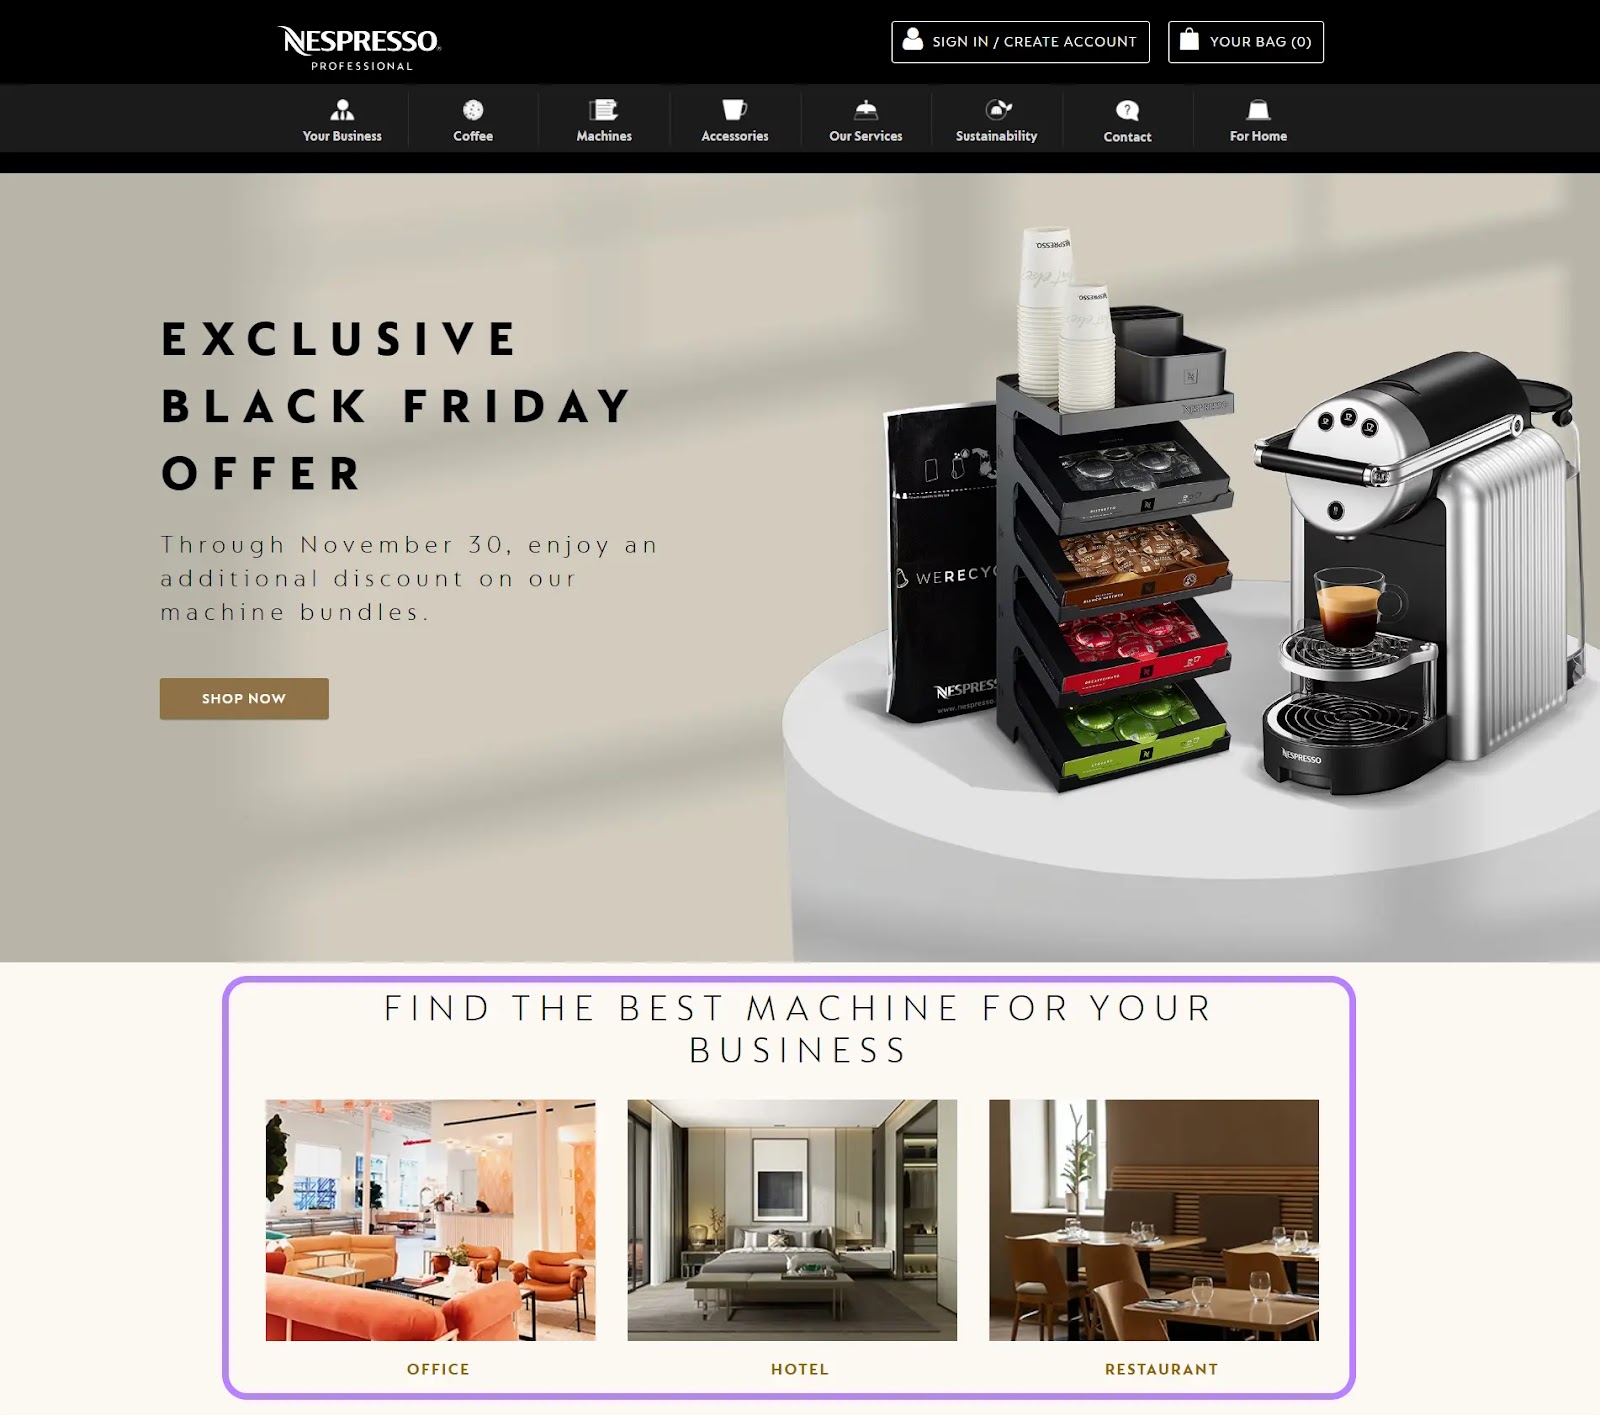 Nespresso's website with "Find the best machines for your business" section highlighted